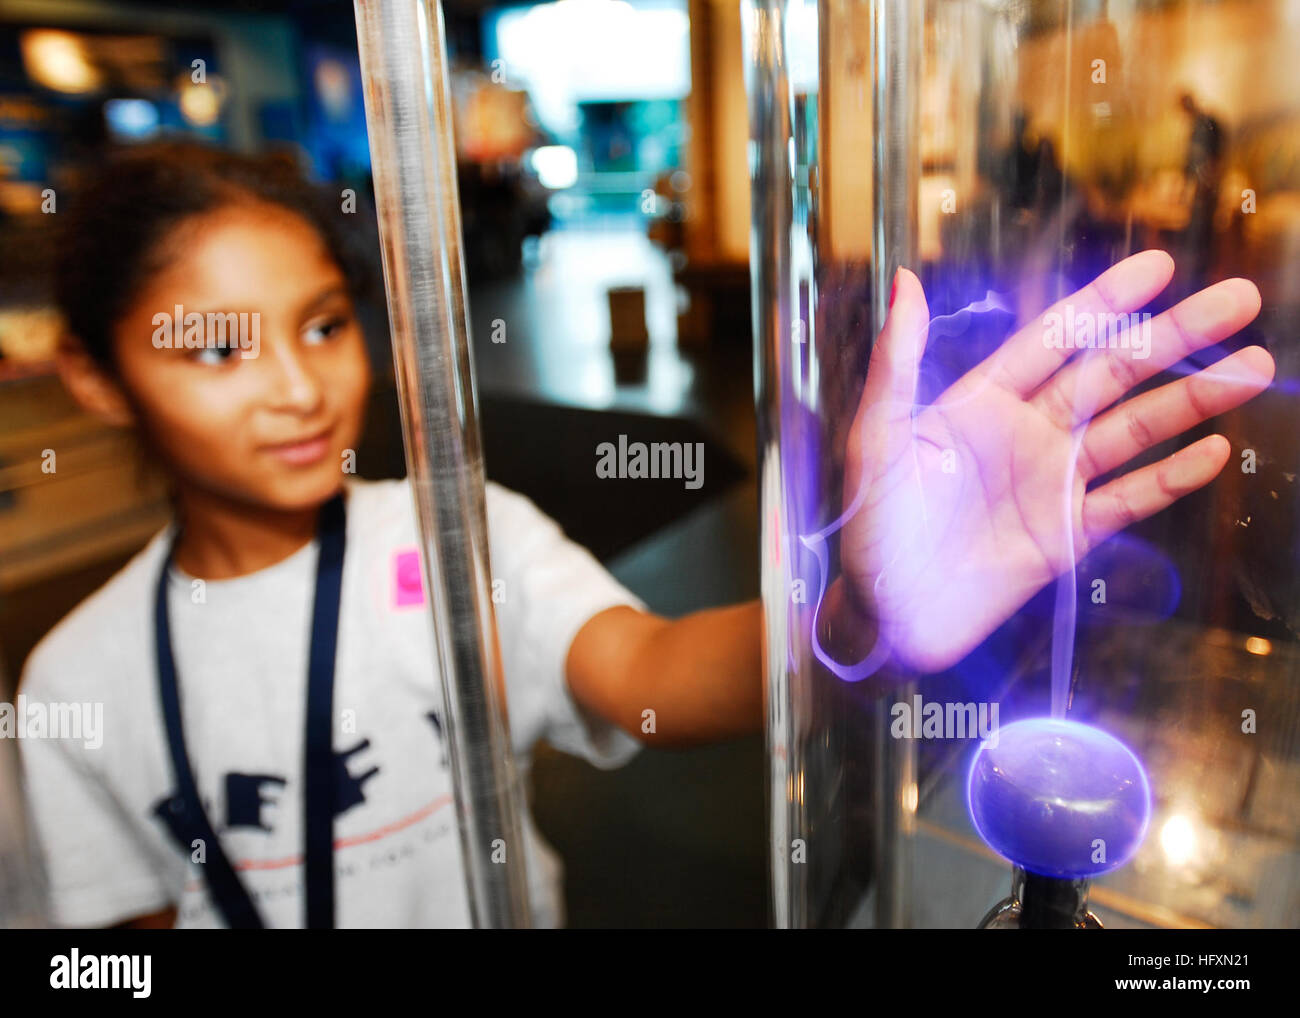 090714-N-2456S-049 NORFOLK, Va. (July 14, 2009) Nine year old, Kaitlynn Walker places her hand on the glass casing of a plasma ball at the Hampton Roads Naval Museum. Drug Education for Youth (DEFY) is a week-long program designed to provide students awareness about the dangers of drugs and alcohol. (U.S. Navy photo by Mass Communication Specialist 3rd Class John Suits/Released) US Navy 090714-N-2456S-049 Nine year old, Kaitlynn Walker places her hand on the glass casing of a plasma ball at the Hampton Roads Naval Museum Stock Photo